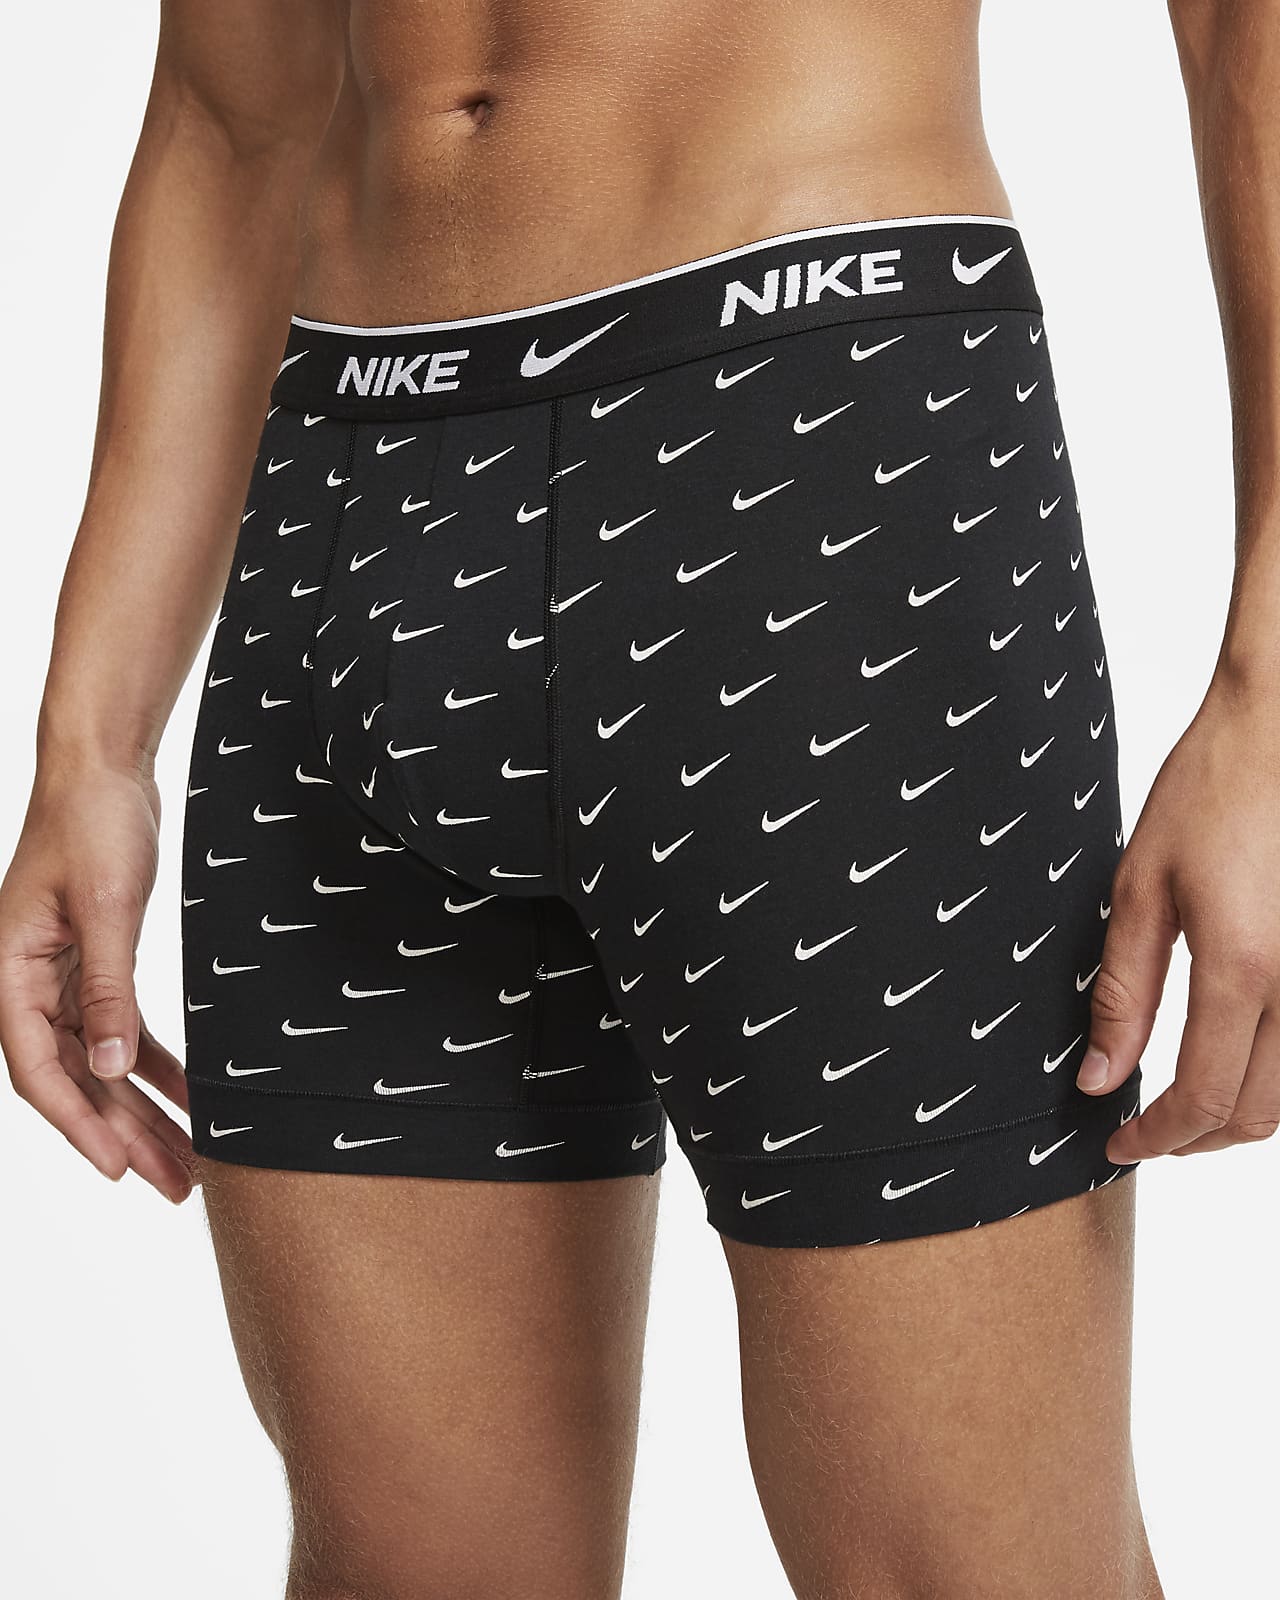 talento Honorable calificación Nike Everyday Cotton Stretch Men's Boxer Briefs (3-Pack). Nike.com